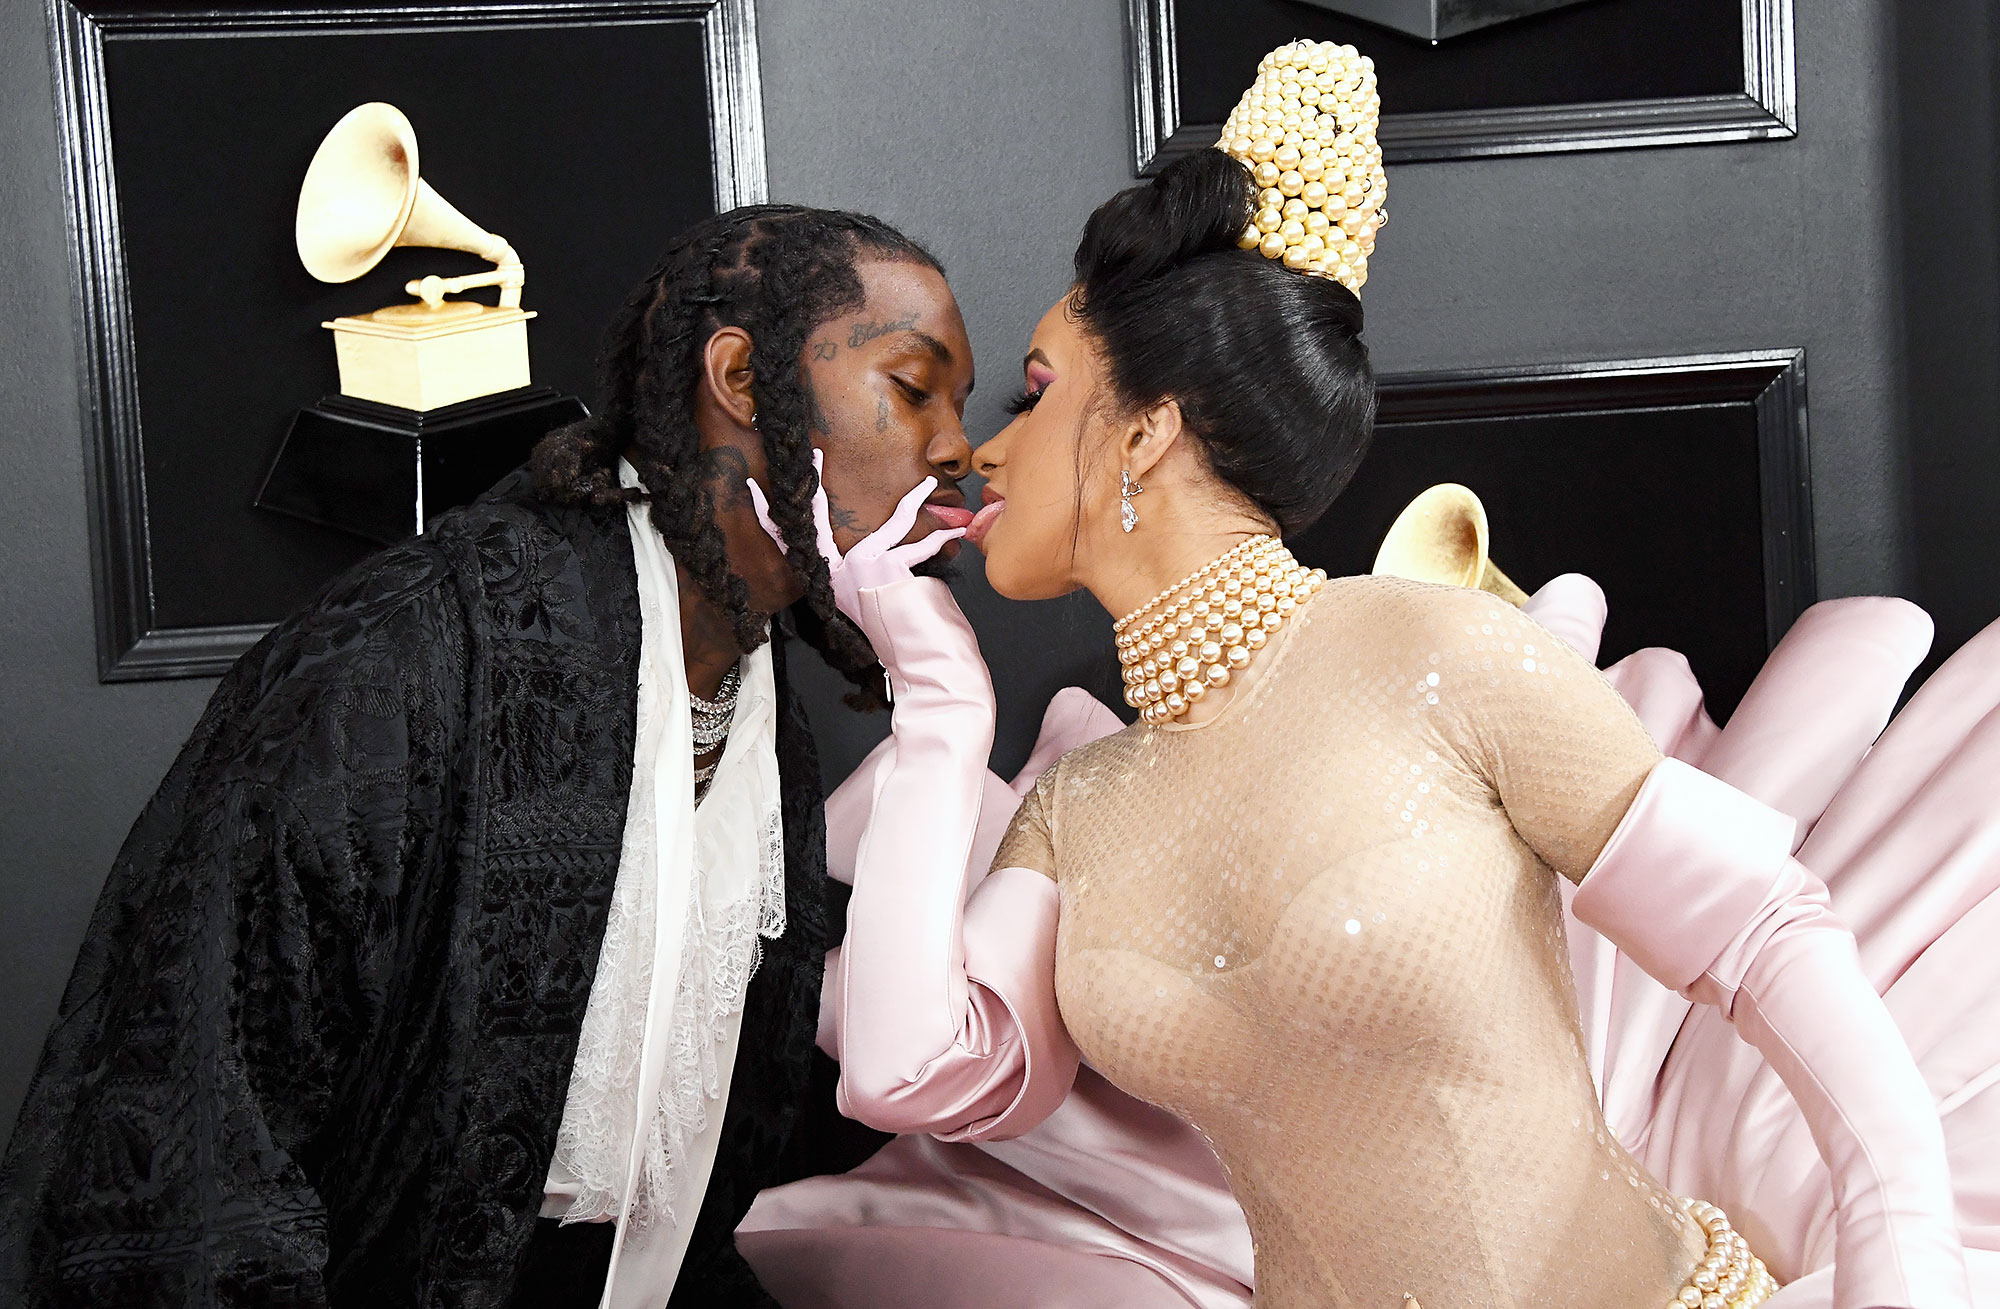 Grammys 2019 Cardi B, Offset Lick Each Other on the Red Carpet picture